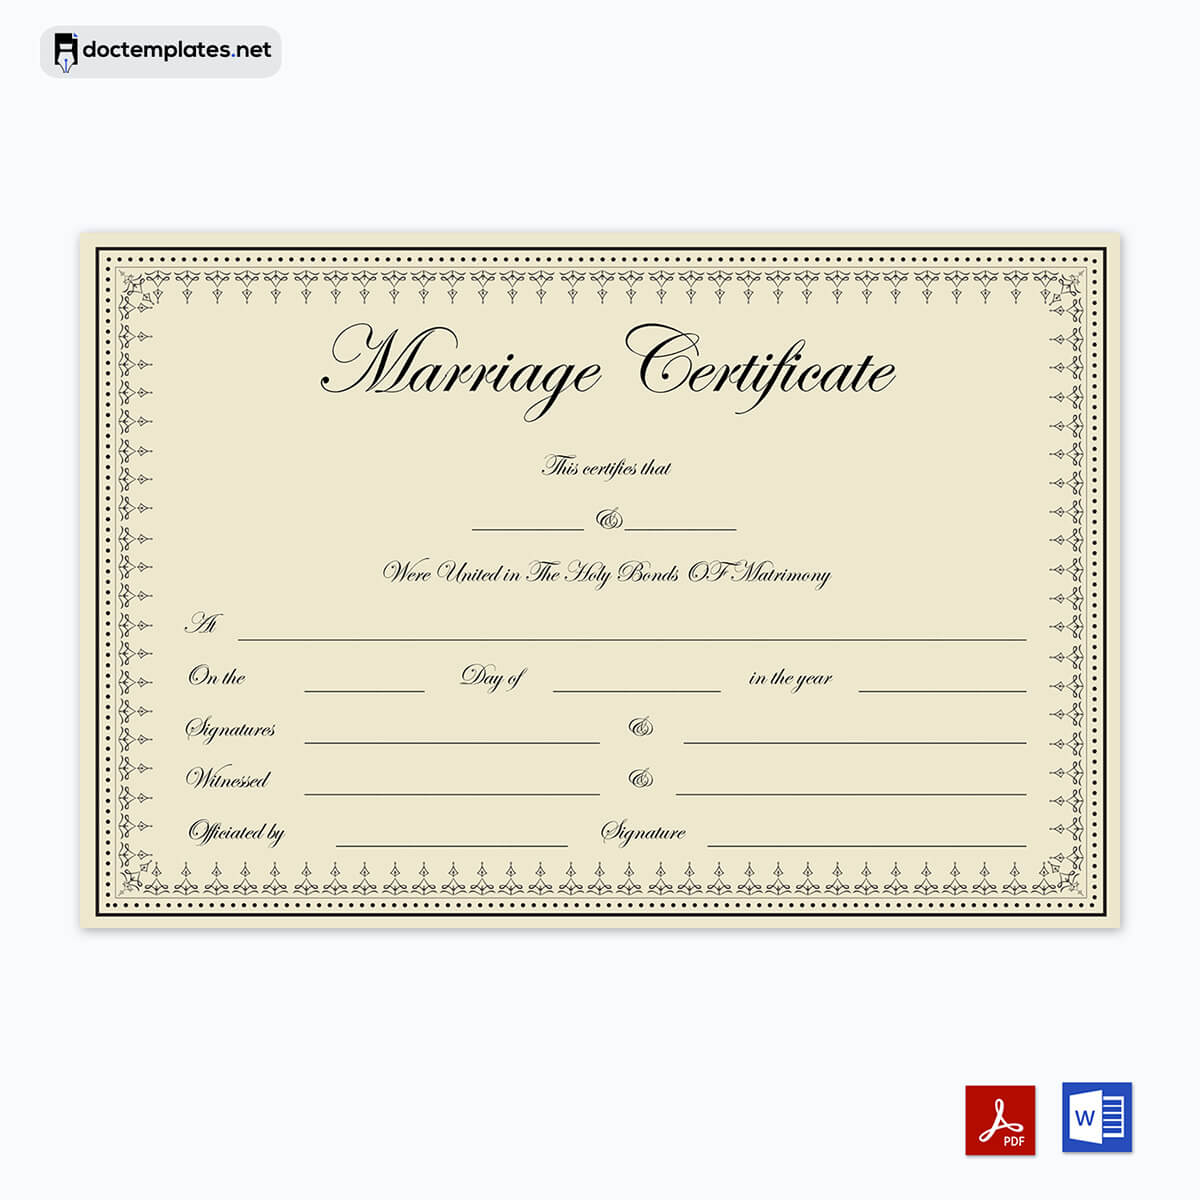  marriage certificate online fake 02